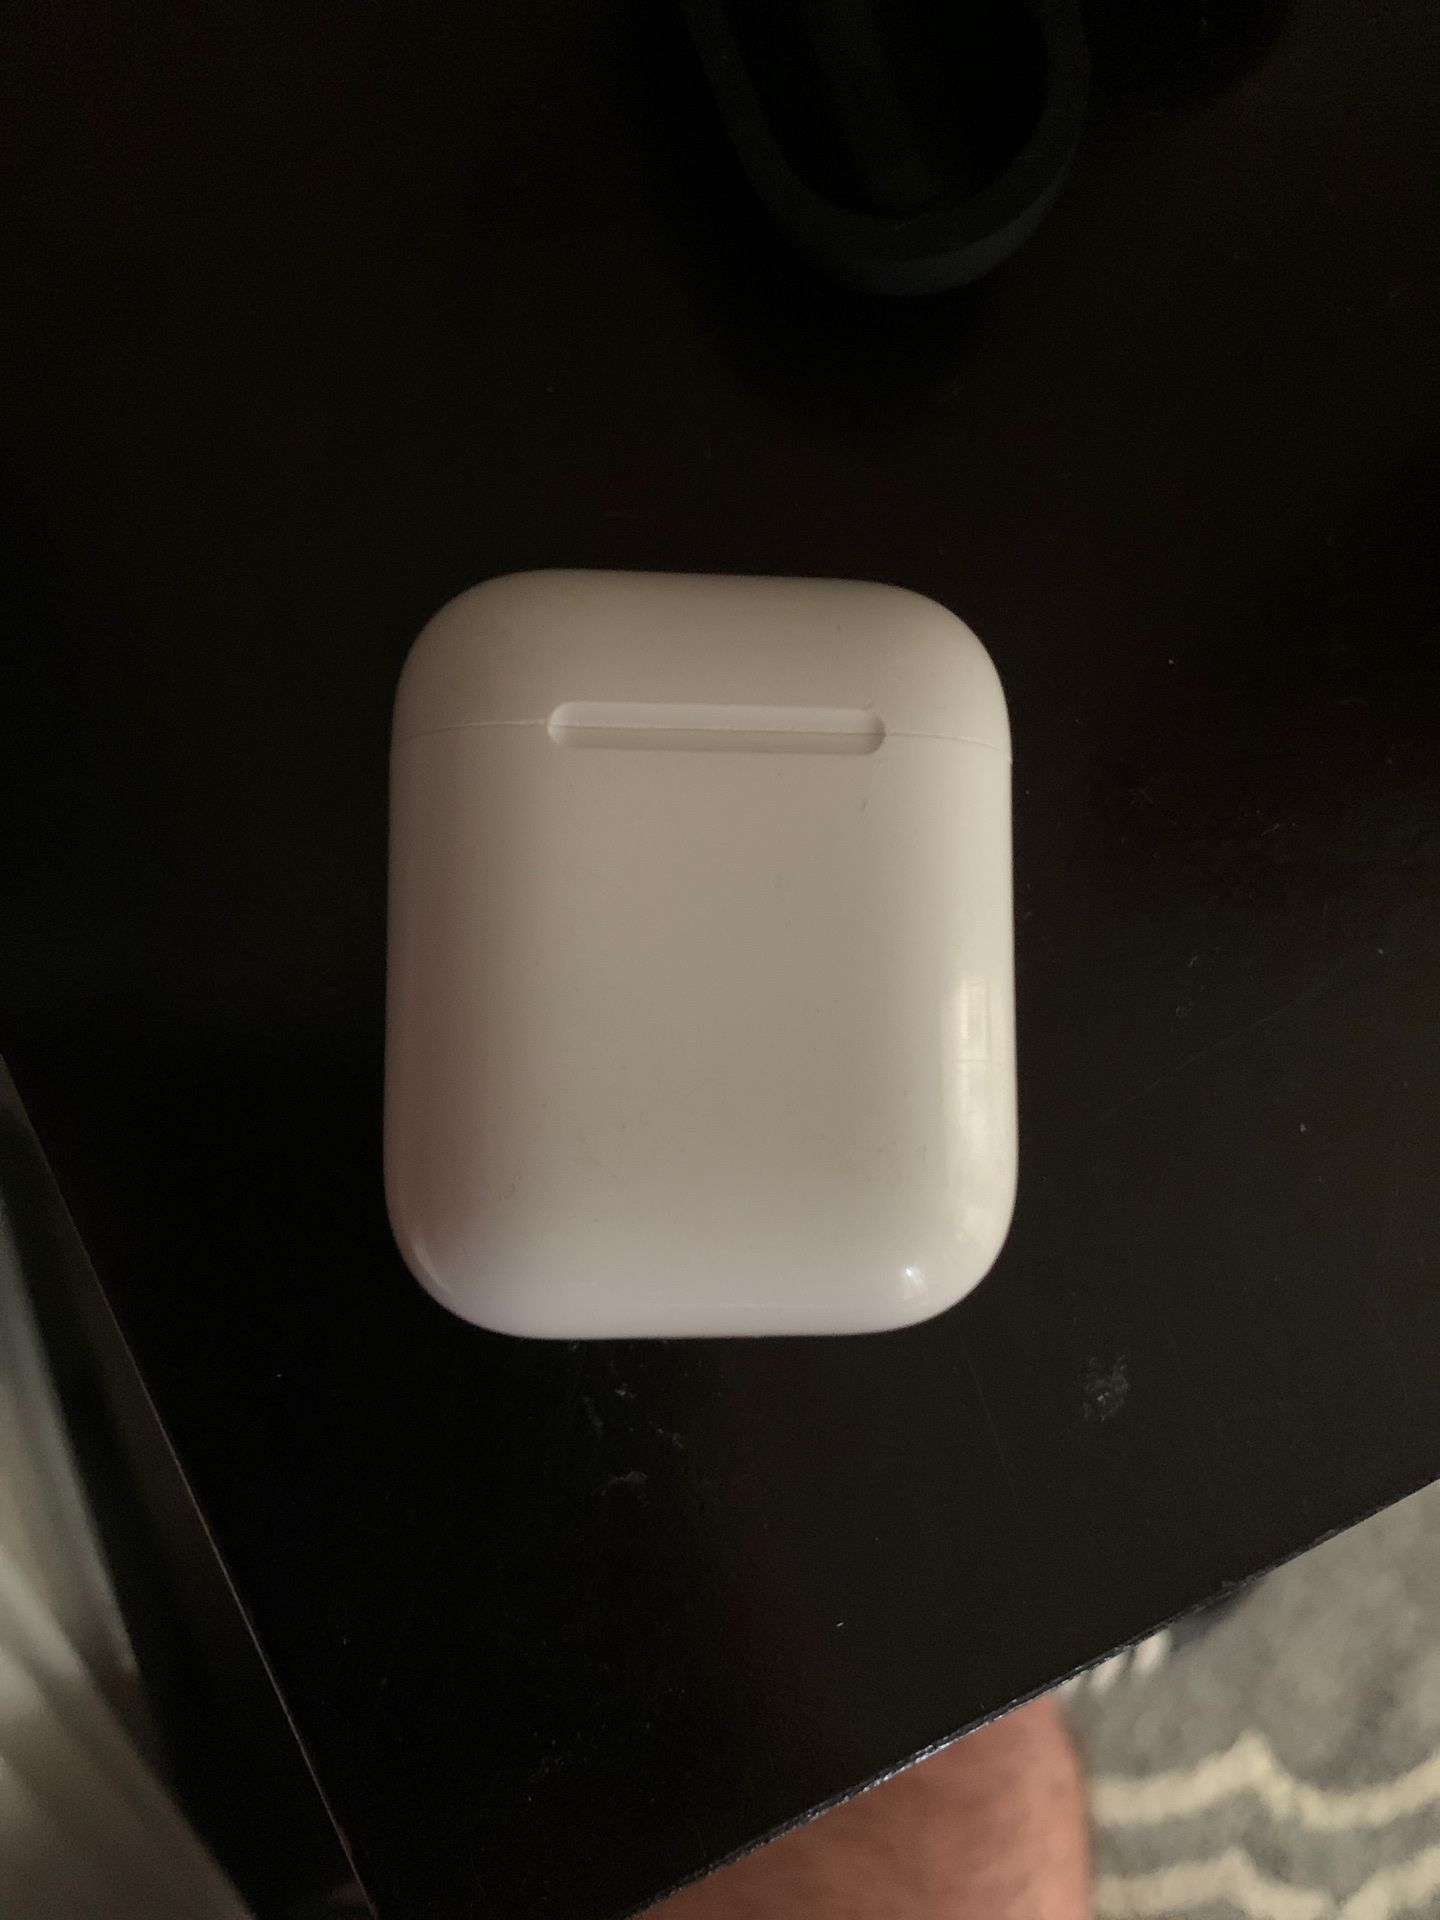 Airpod charger